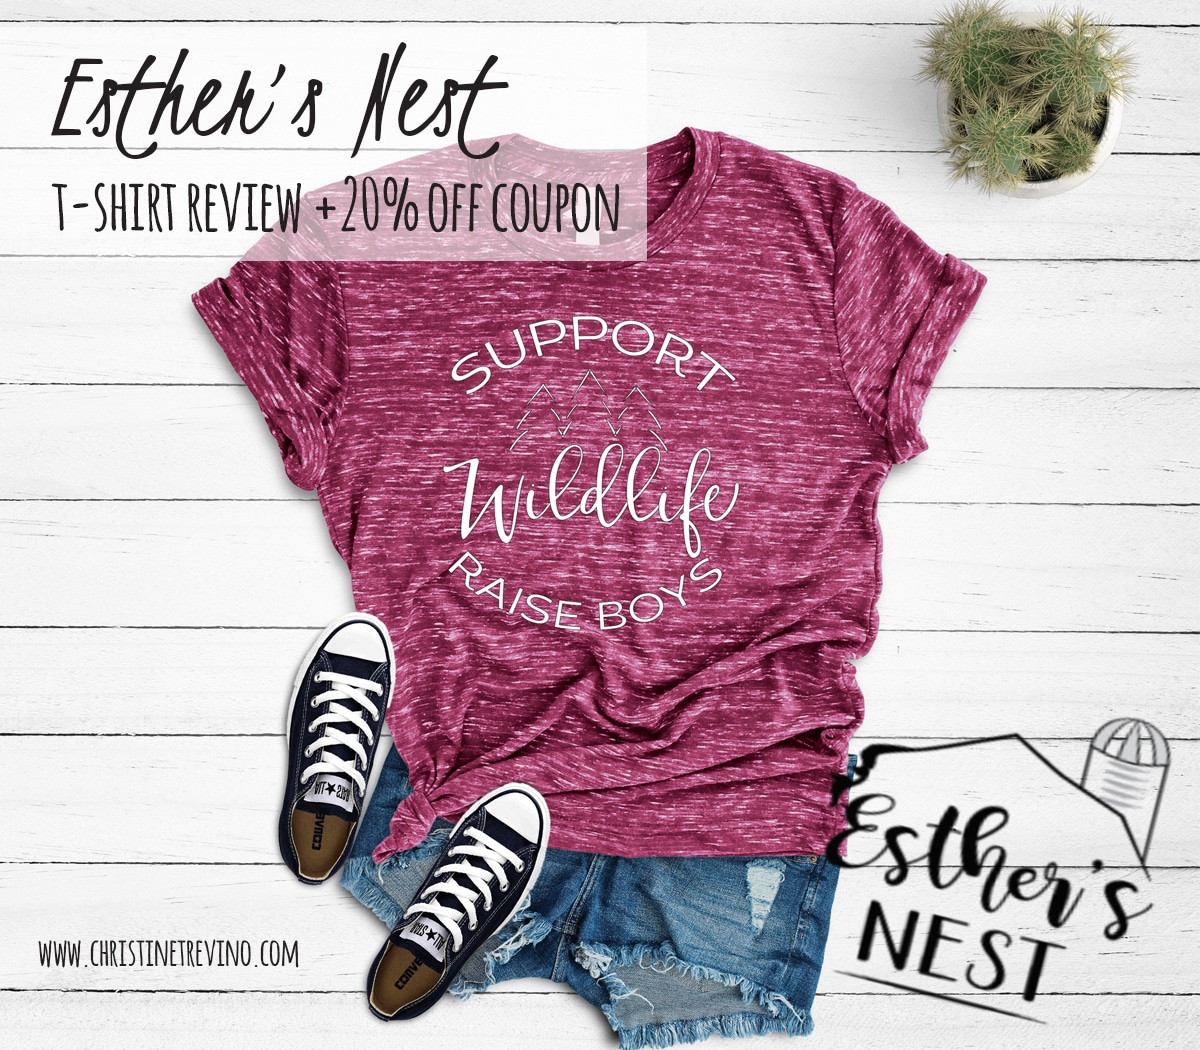 Esther’s Nest | T-Shirt Review [+20% off coupon code]